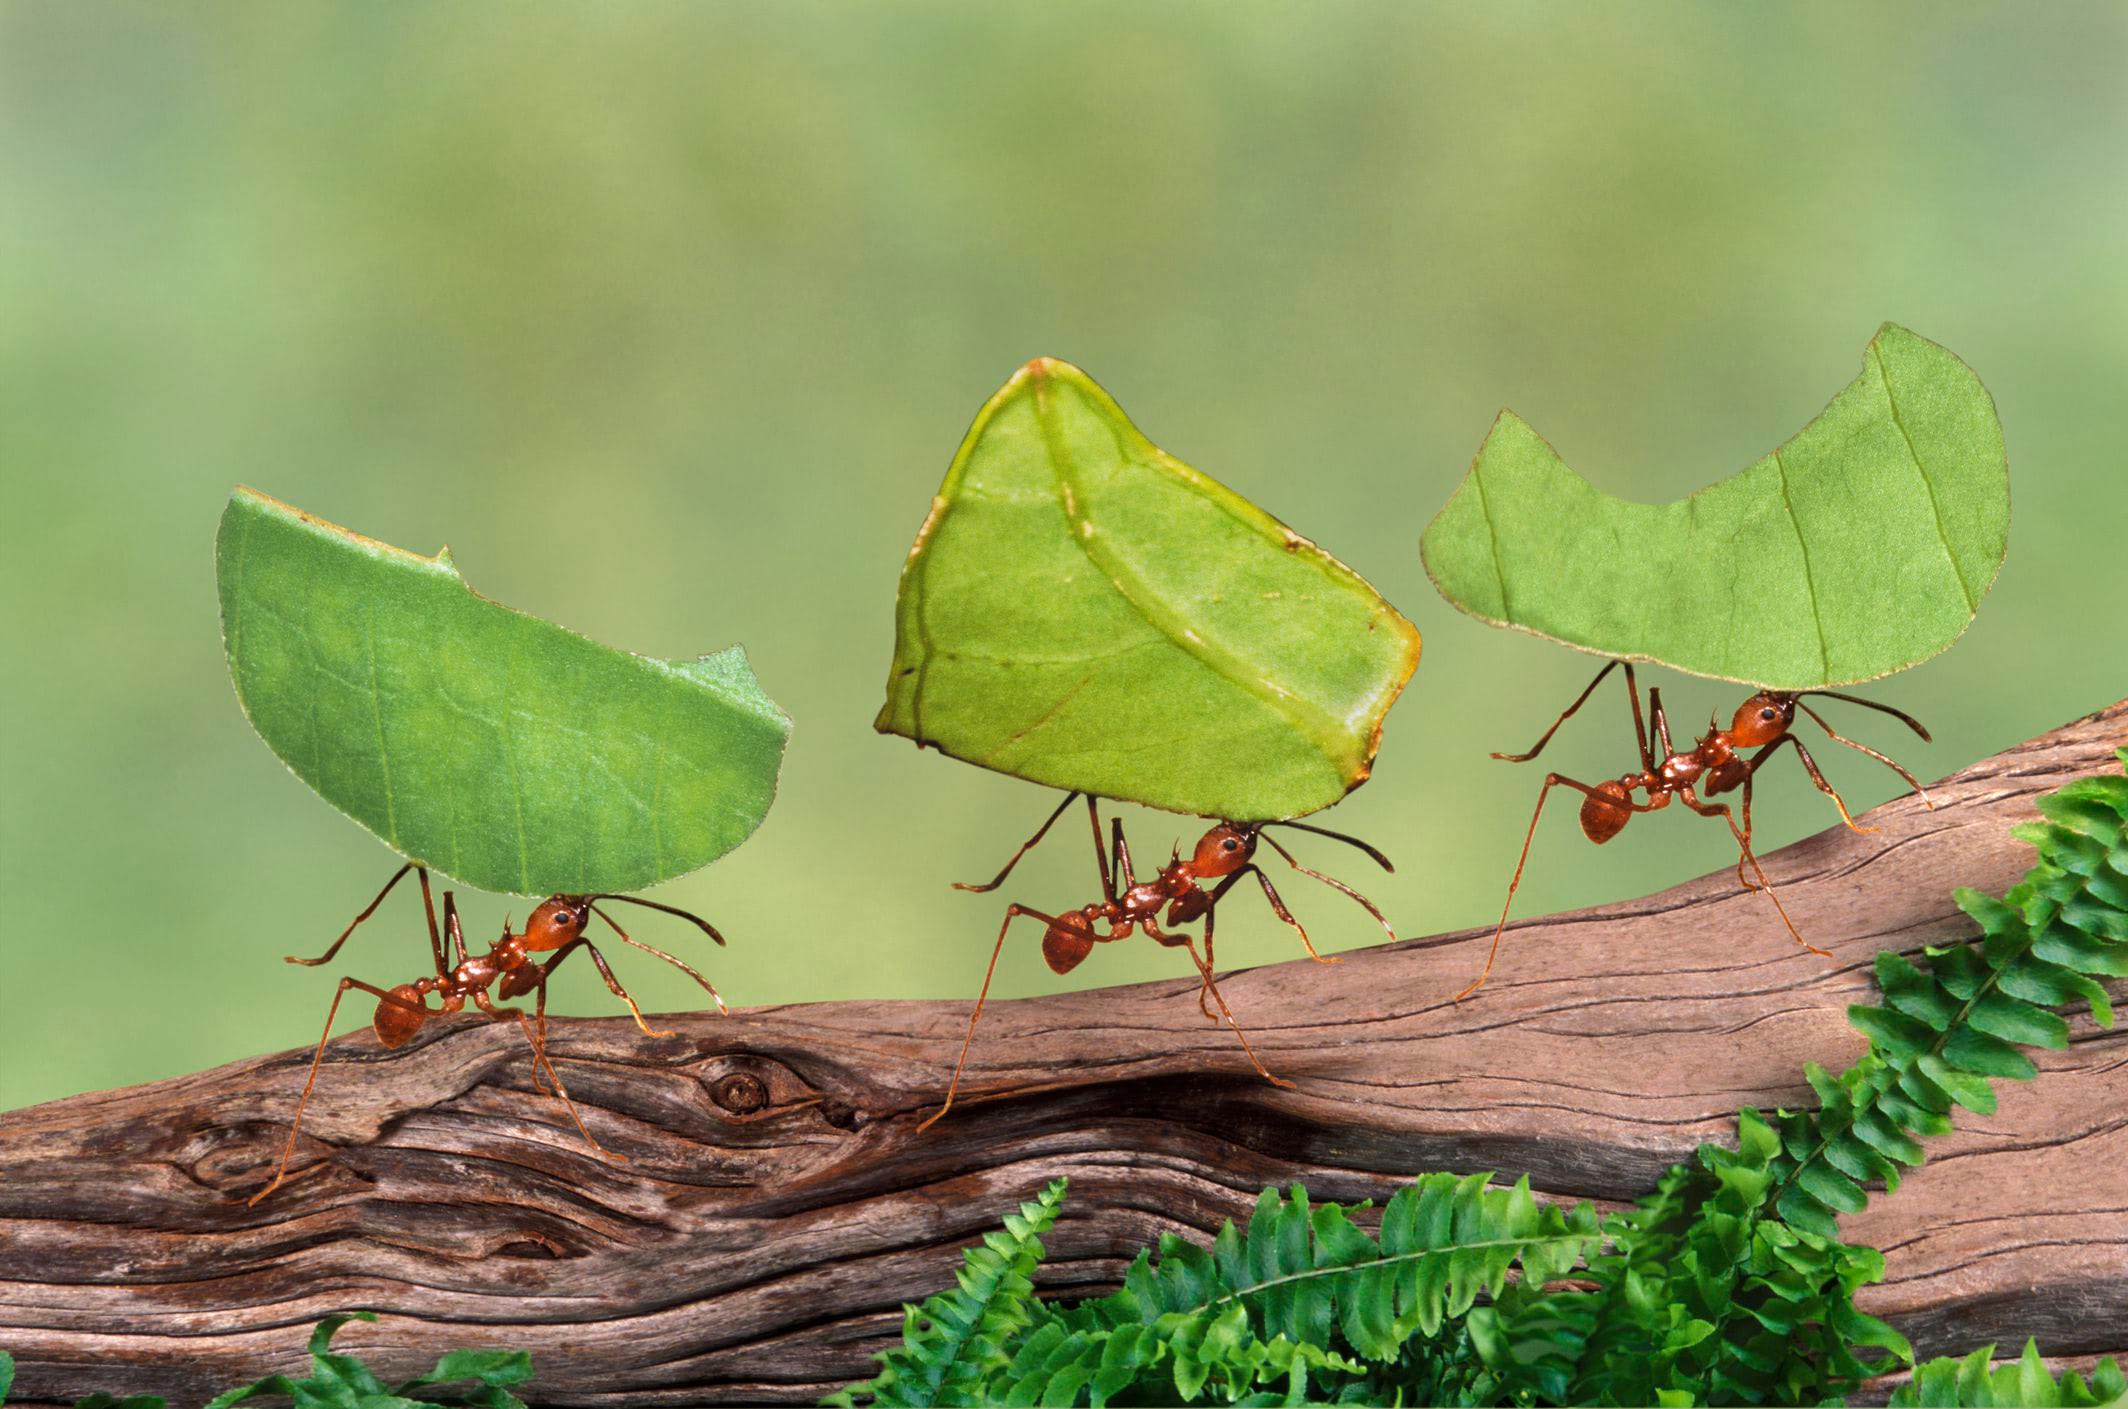 Tiny Robots Discover Learning Process from Ants